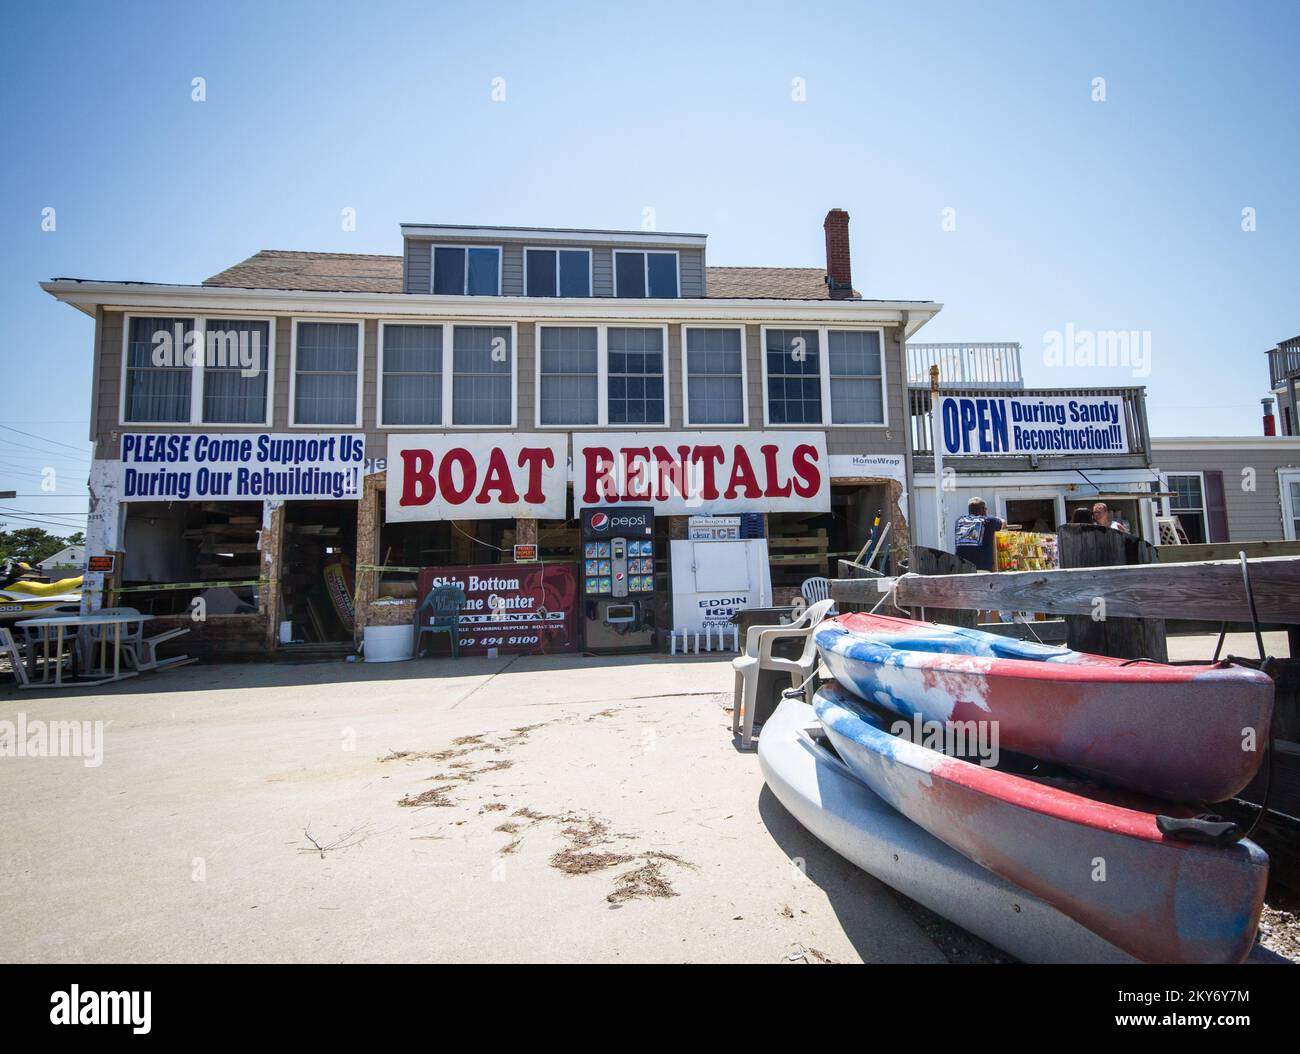 Ship Bottom, N.J., June 20, 2013   Although this boat rental shop in Ship Bottom, N.J., sustained considerable damage from Hurricane Sandy, it's open for business and seeking community support during their rebuilding and recovery efforts after the storm. New Jersey Hurricane Sandy. Photographs Relating to Disasters and Emergency Management Programs, Activities, and Officials Stock Photo